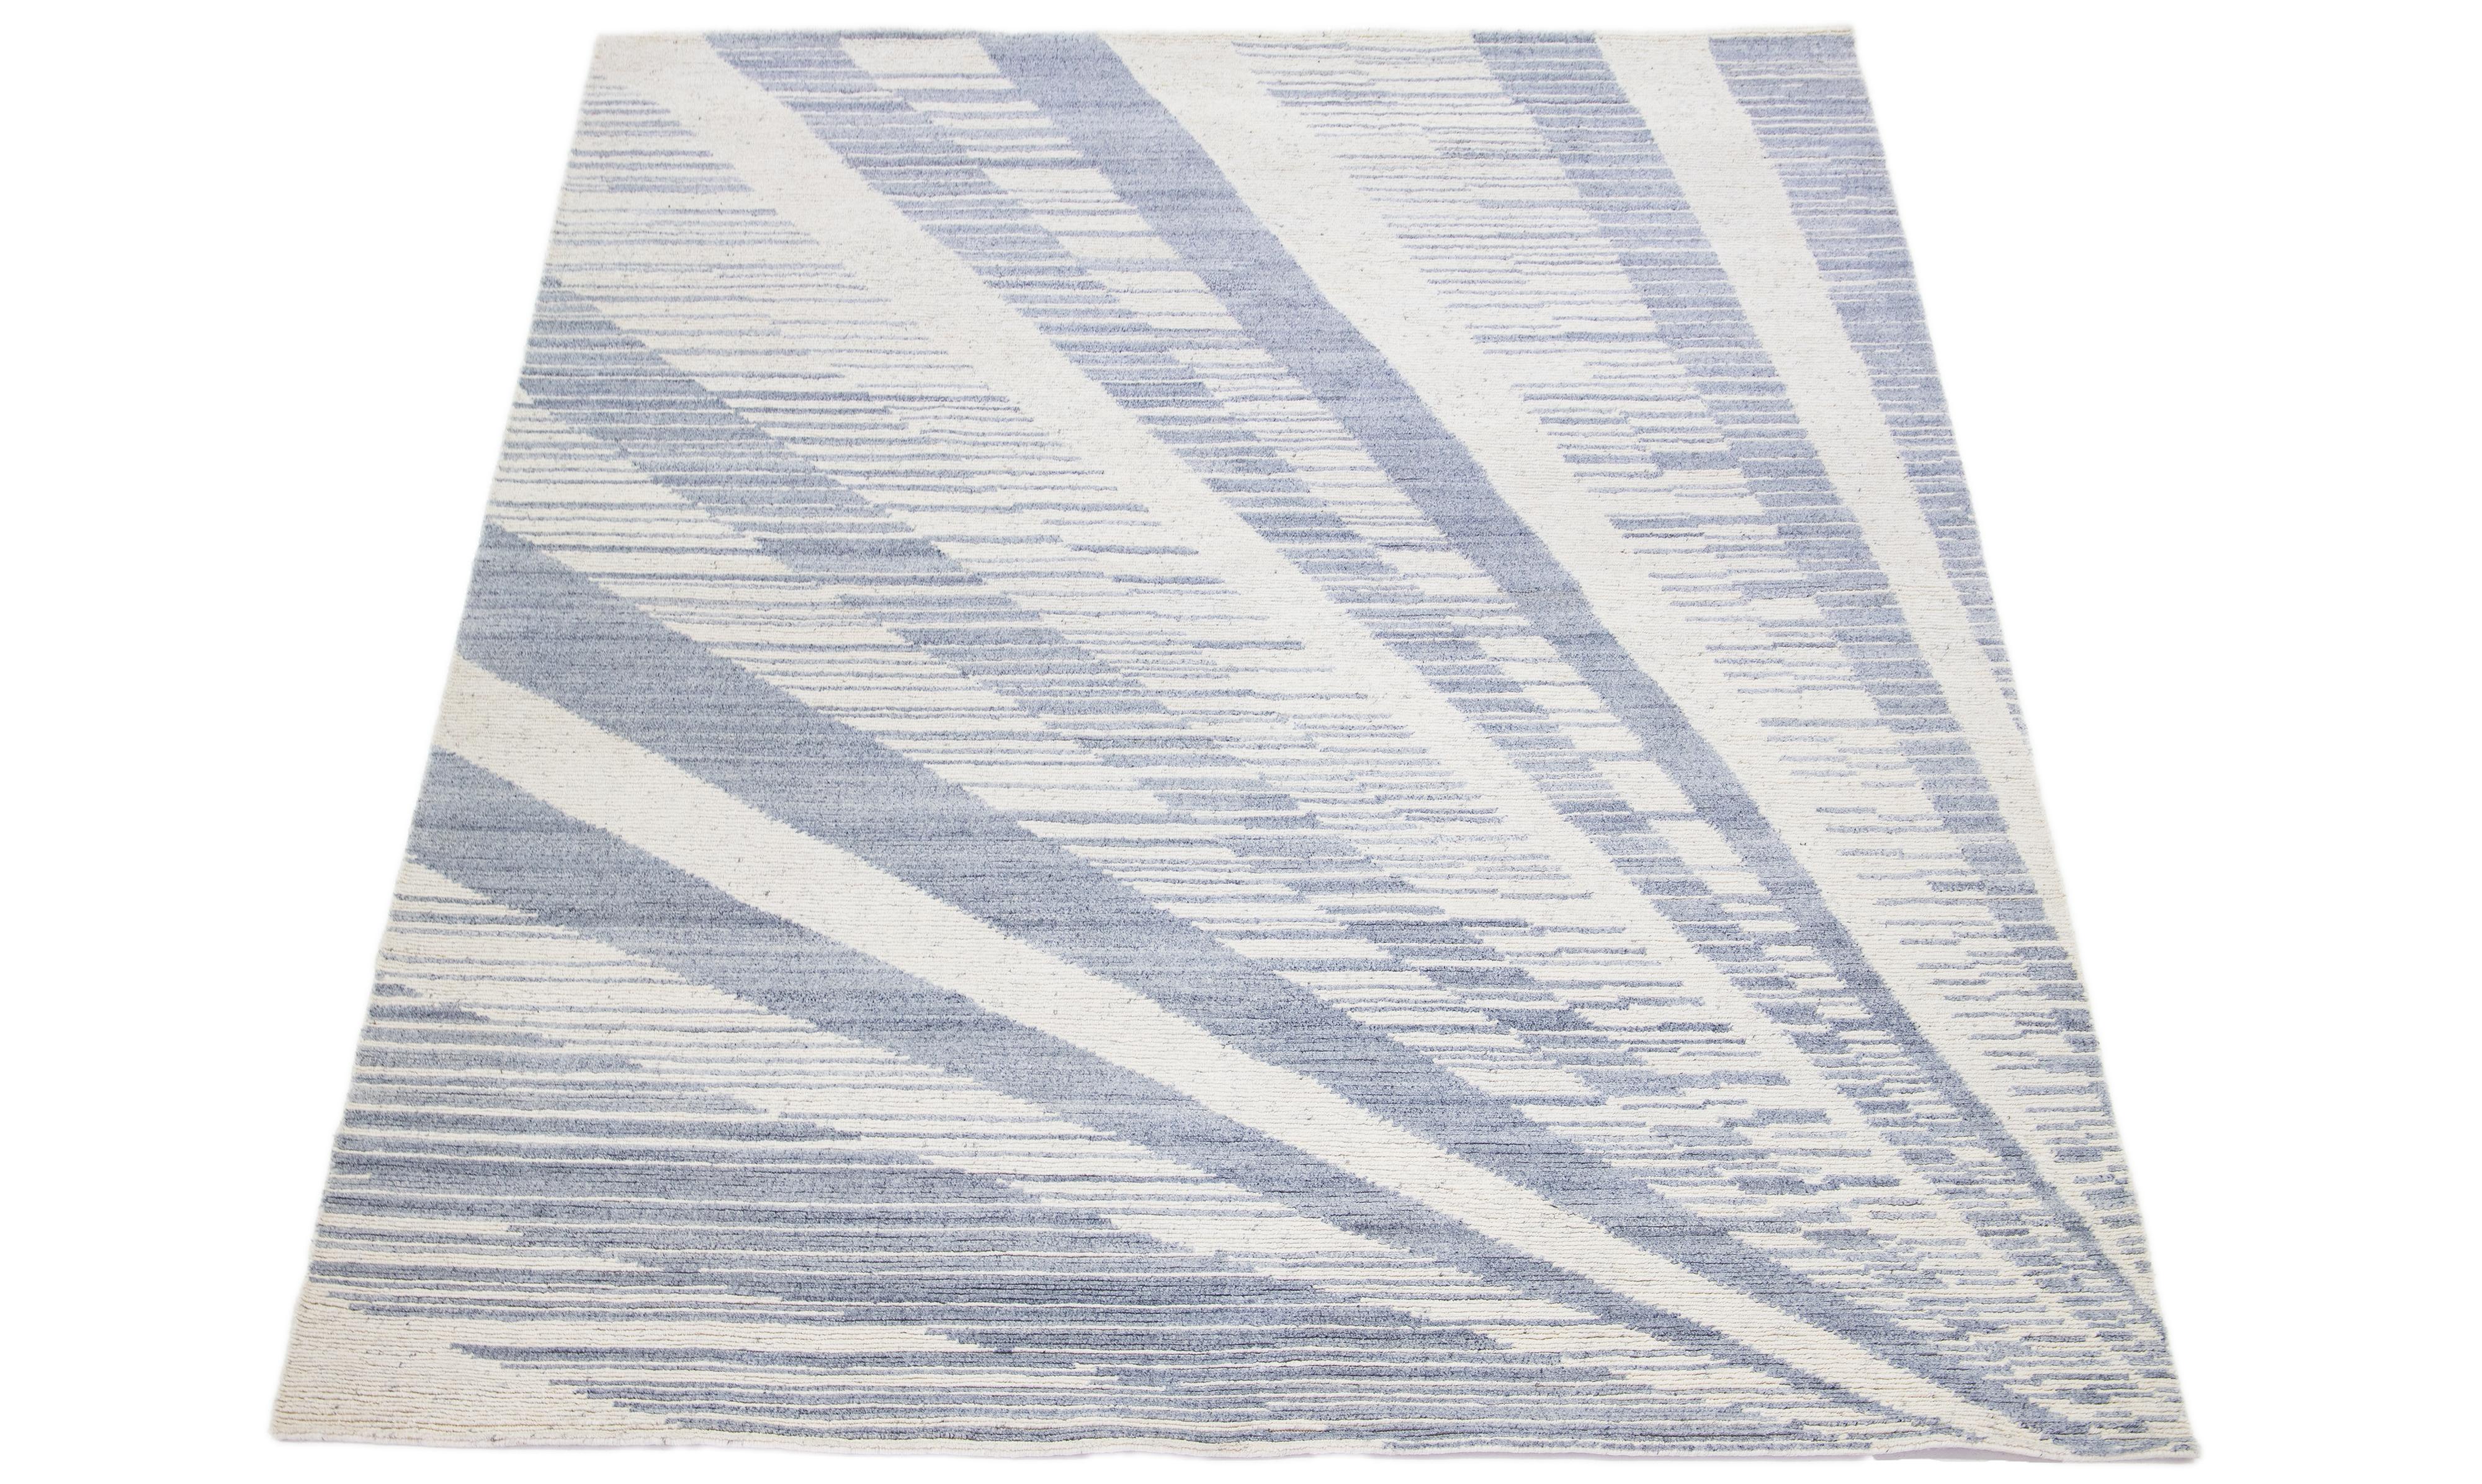 This modern wool rug showcases an abstract gray and ivory field with decorative ivory. The all-over design exemplifies the spirit of modernism in the 21st century, making it a truly sophisticated and fashionable addition to any interior